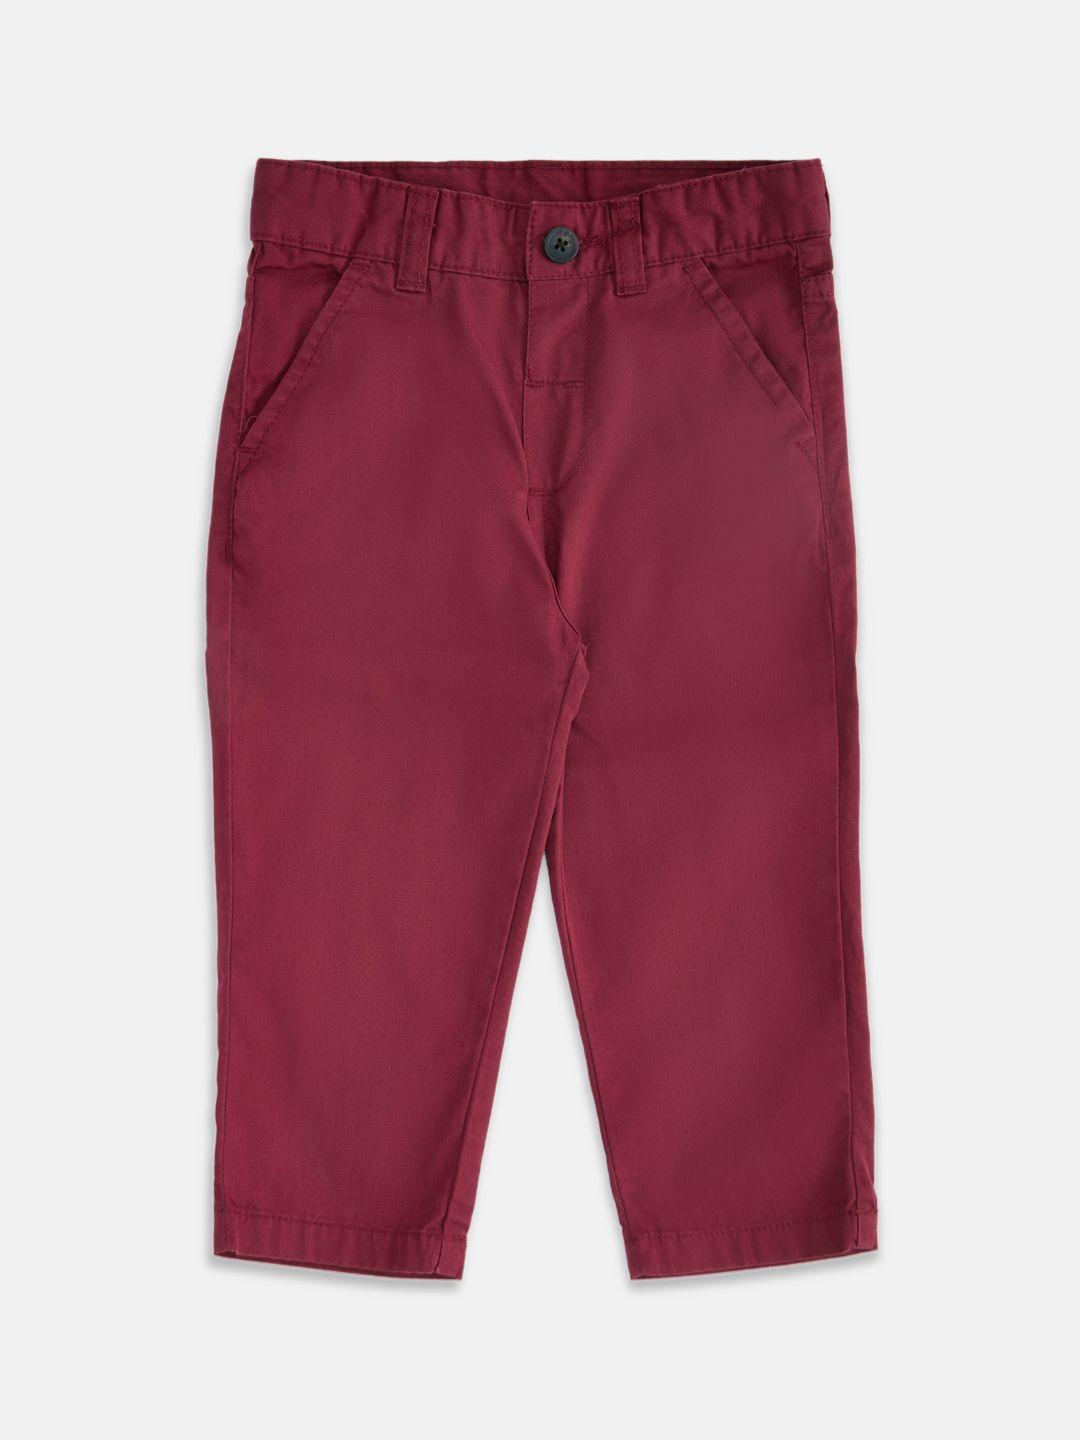 pantaloons-baby-boys-maroon-low-rise-chinos-trousers